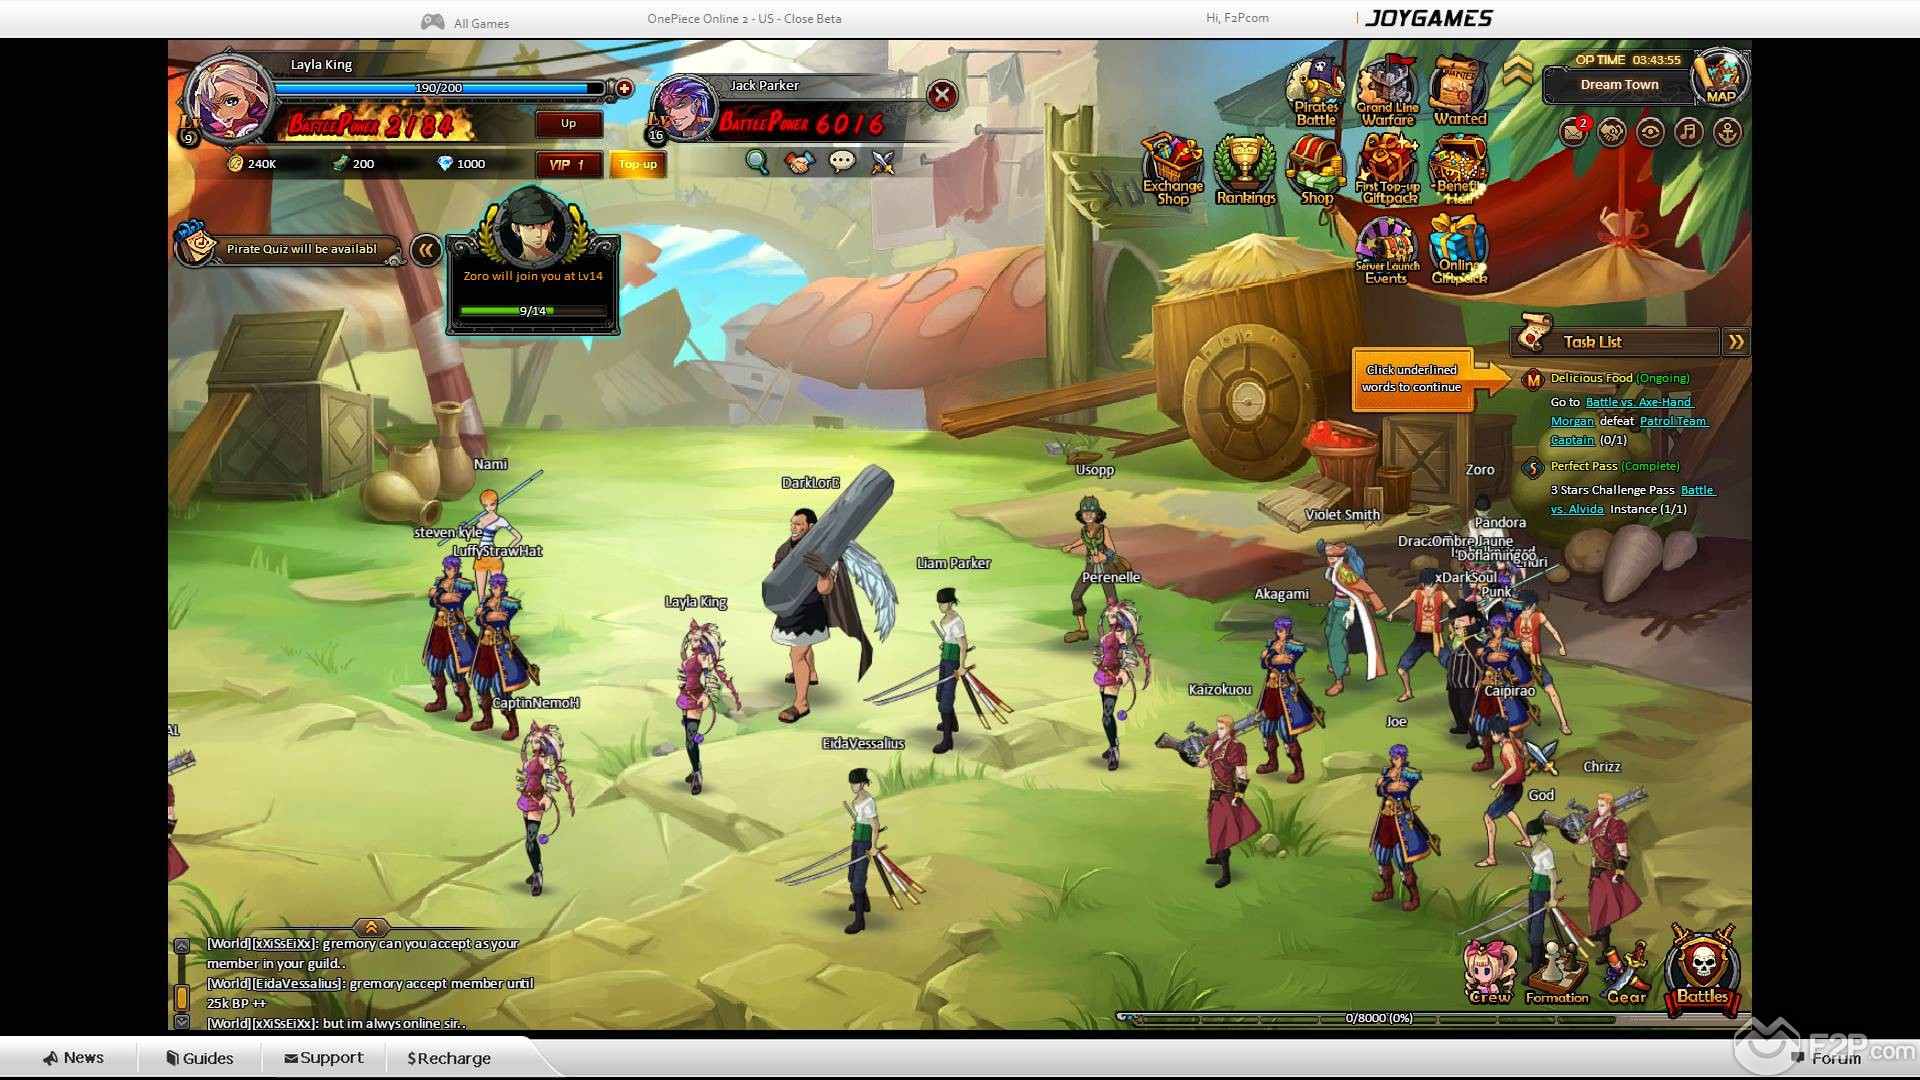 One Piece Online 2: Pirate King Análise e Forum - MMOs Brasil